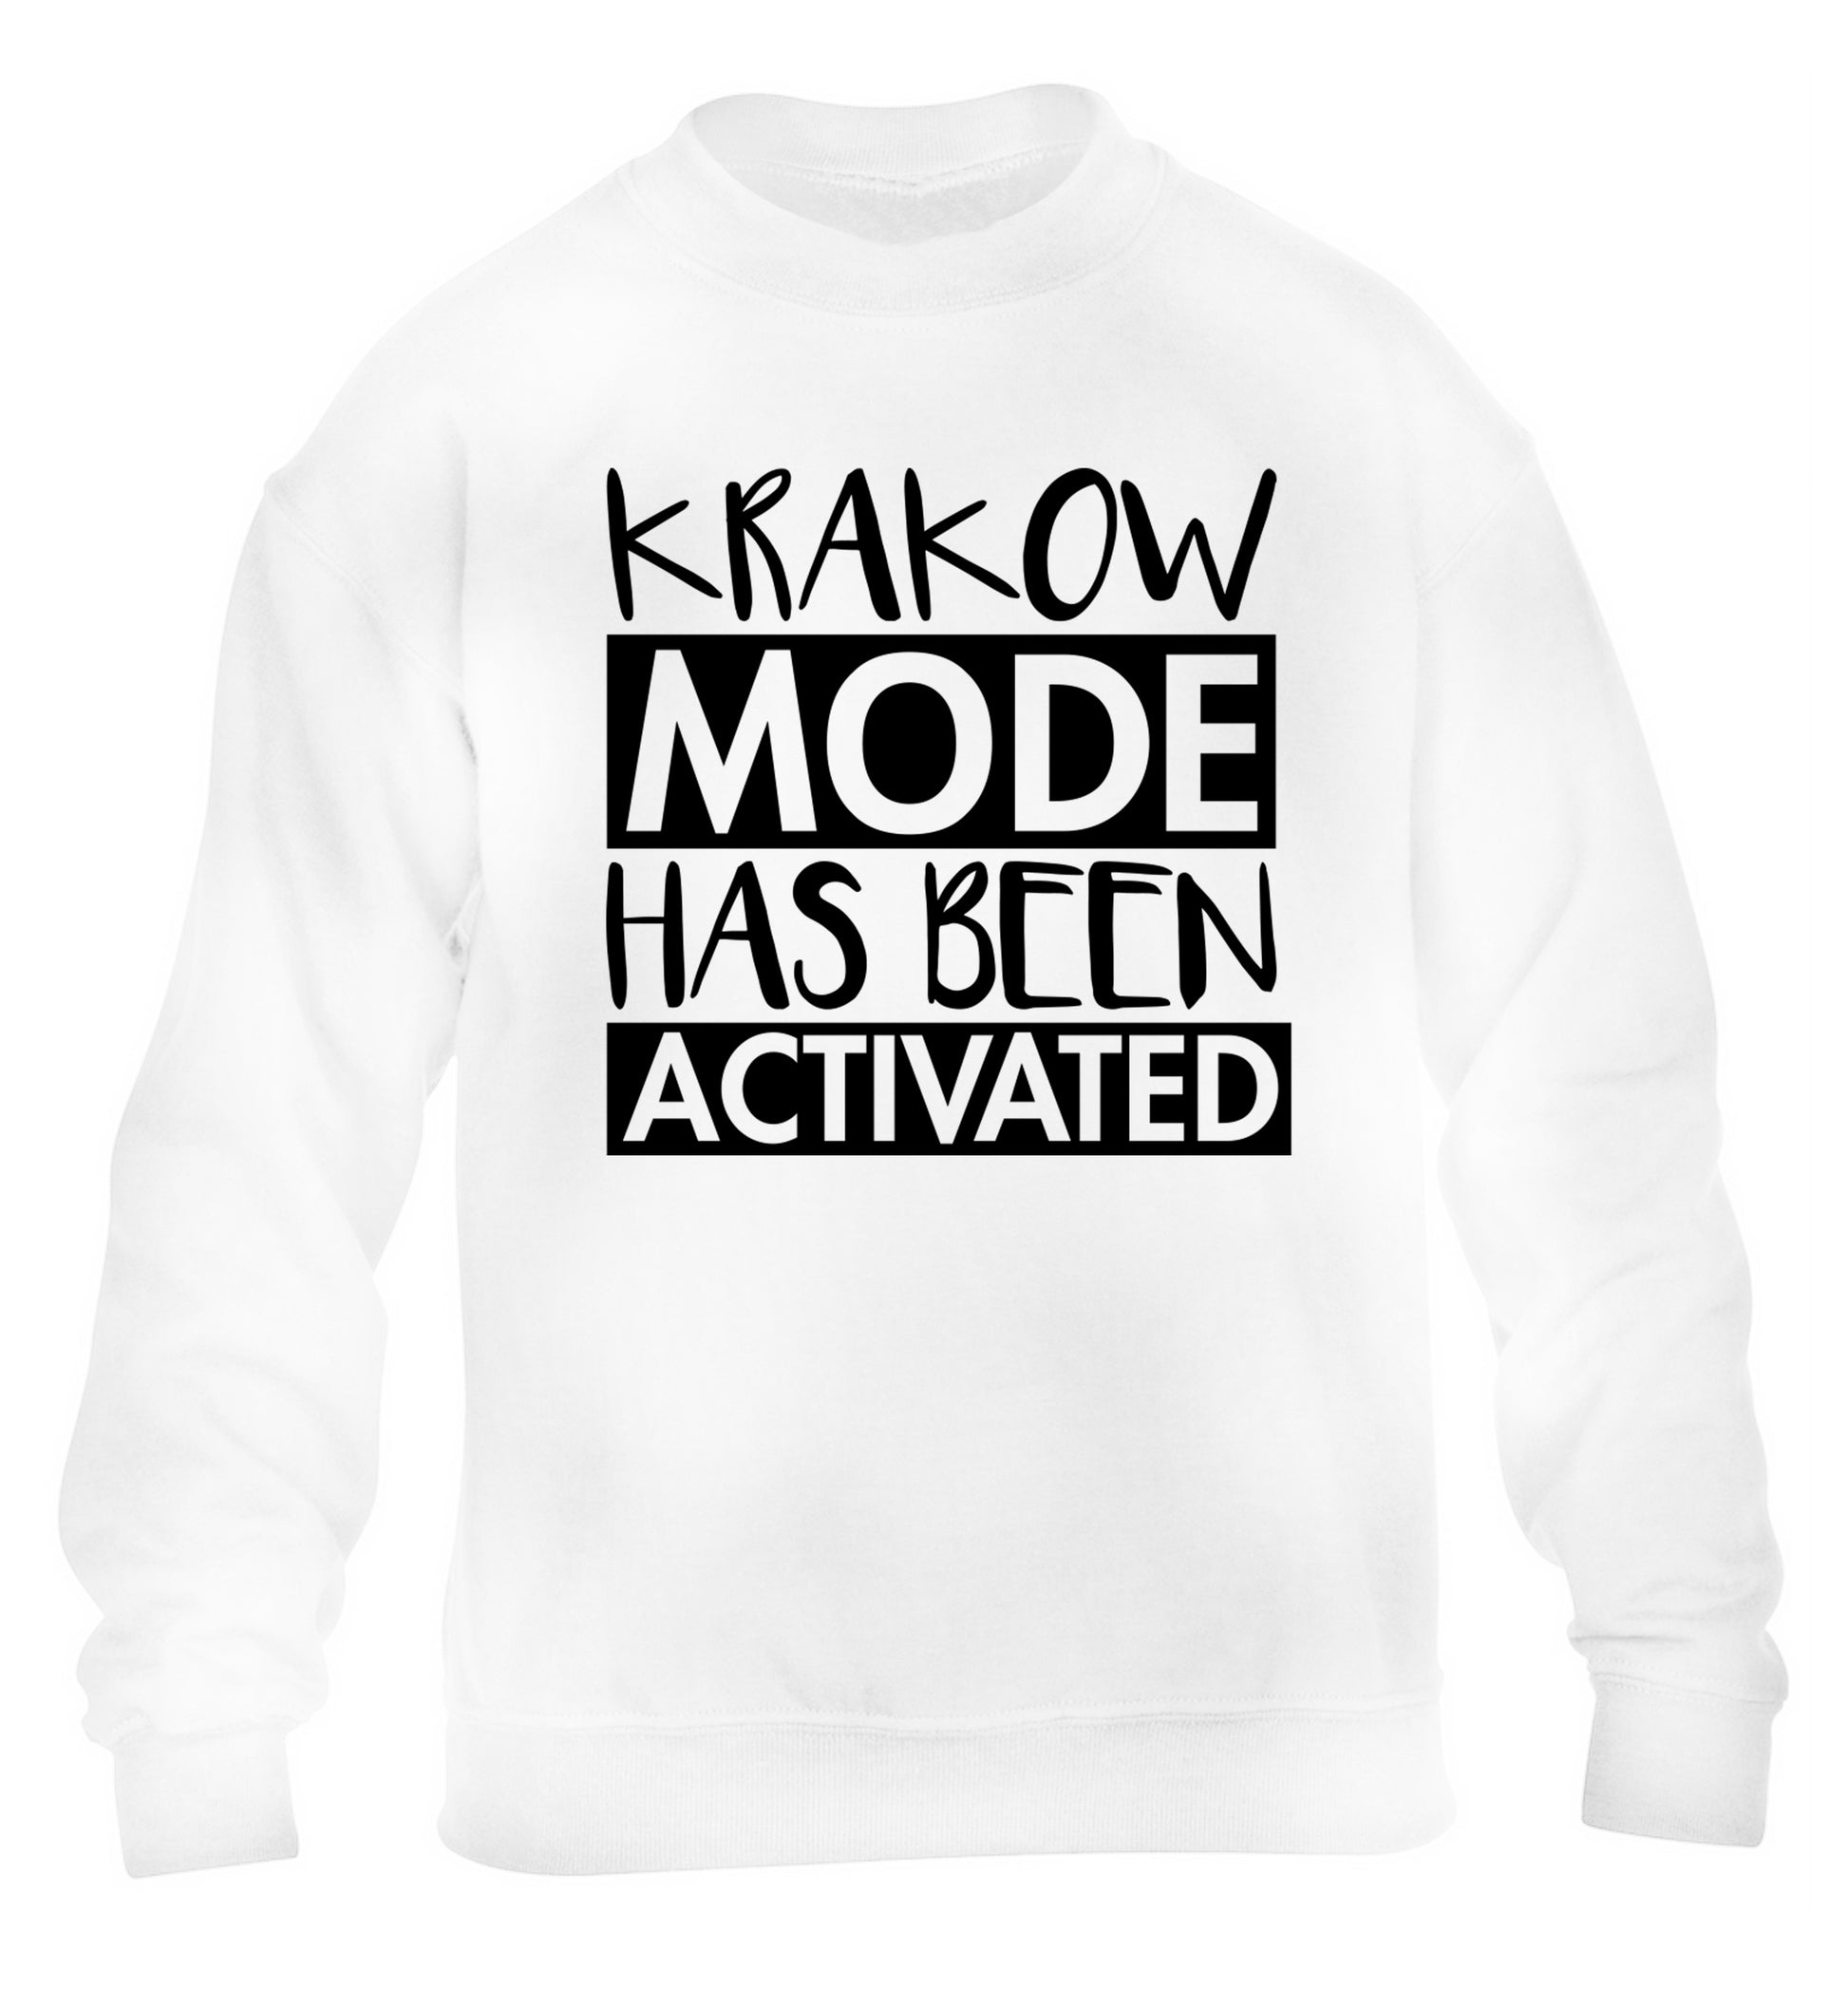 Krakow mode has been activated children's white sweater 12-13 Years